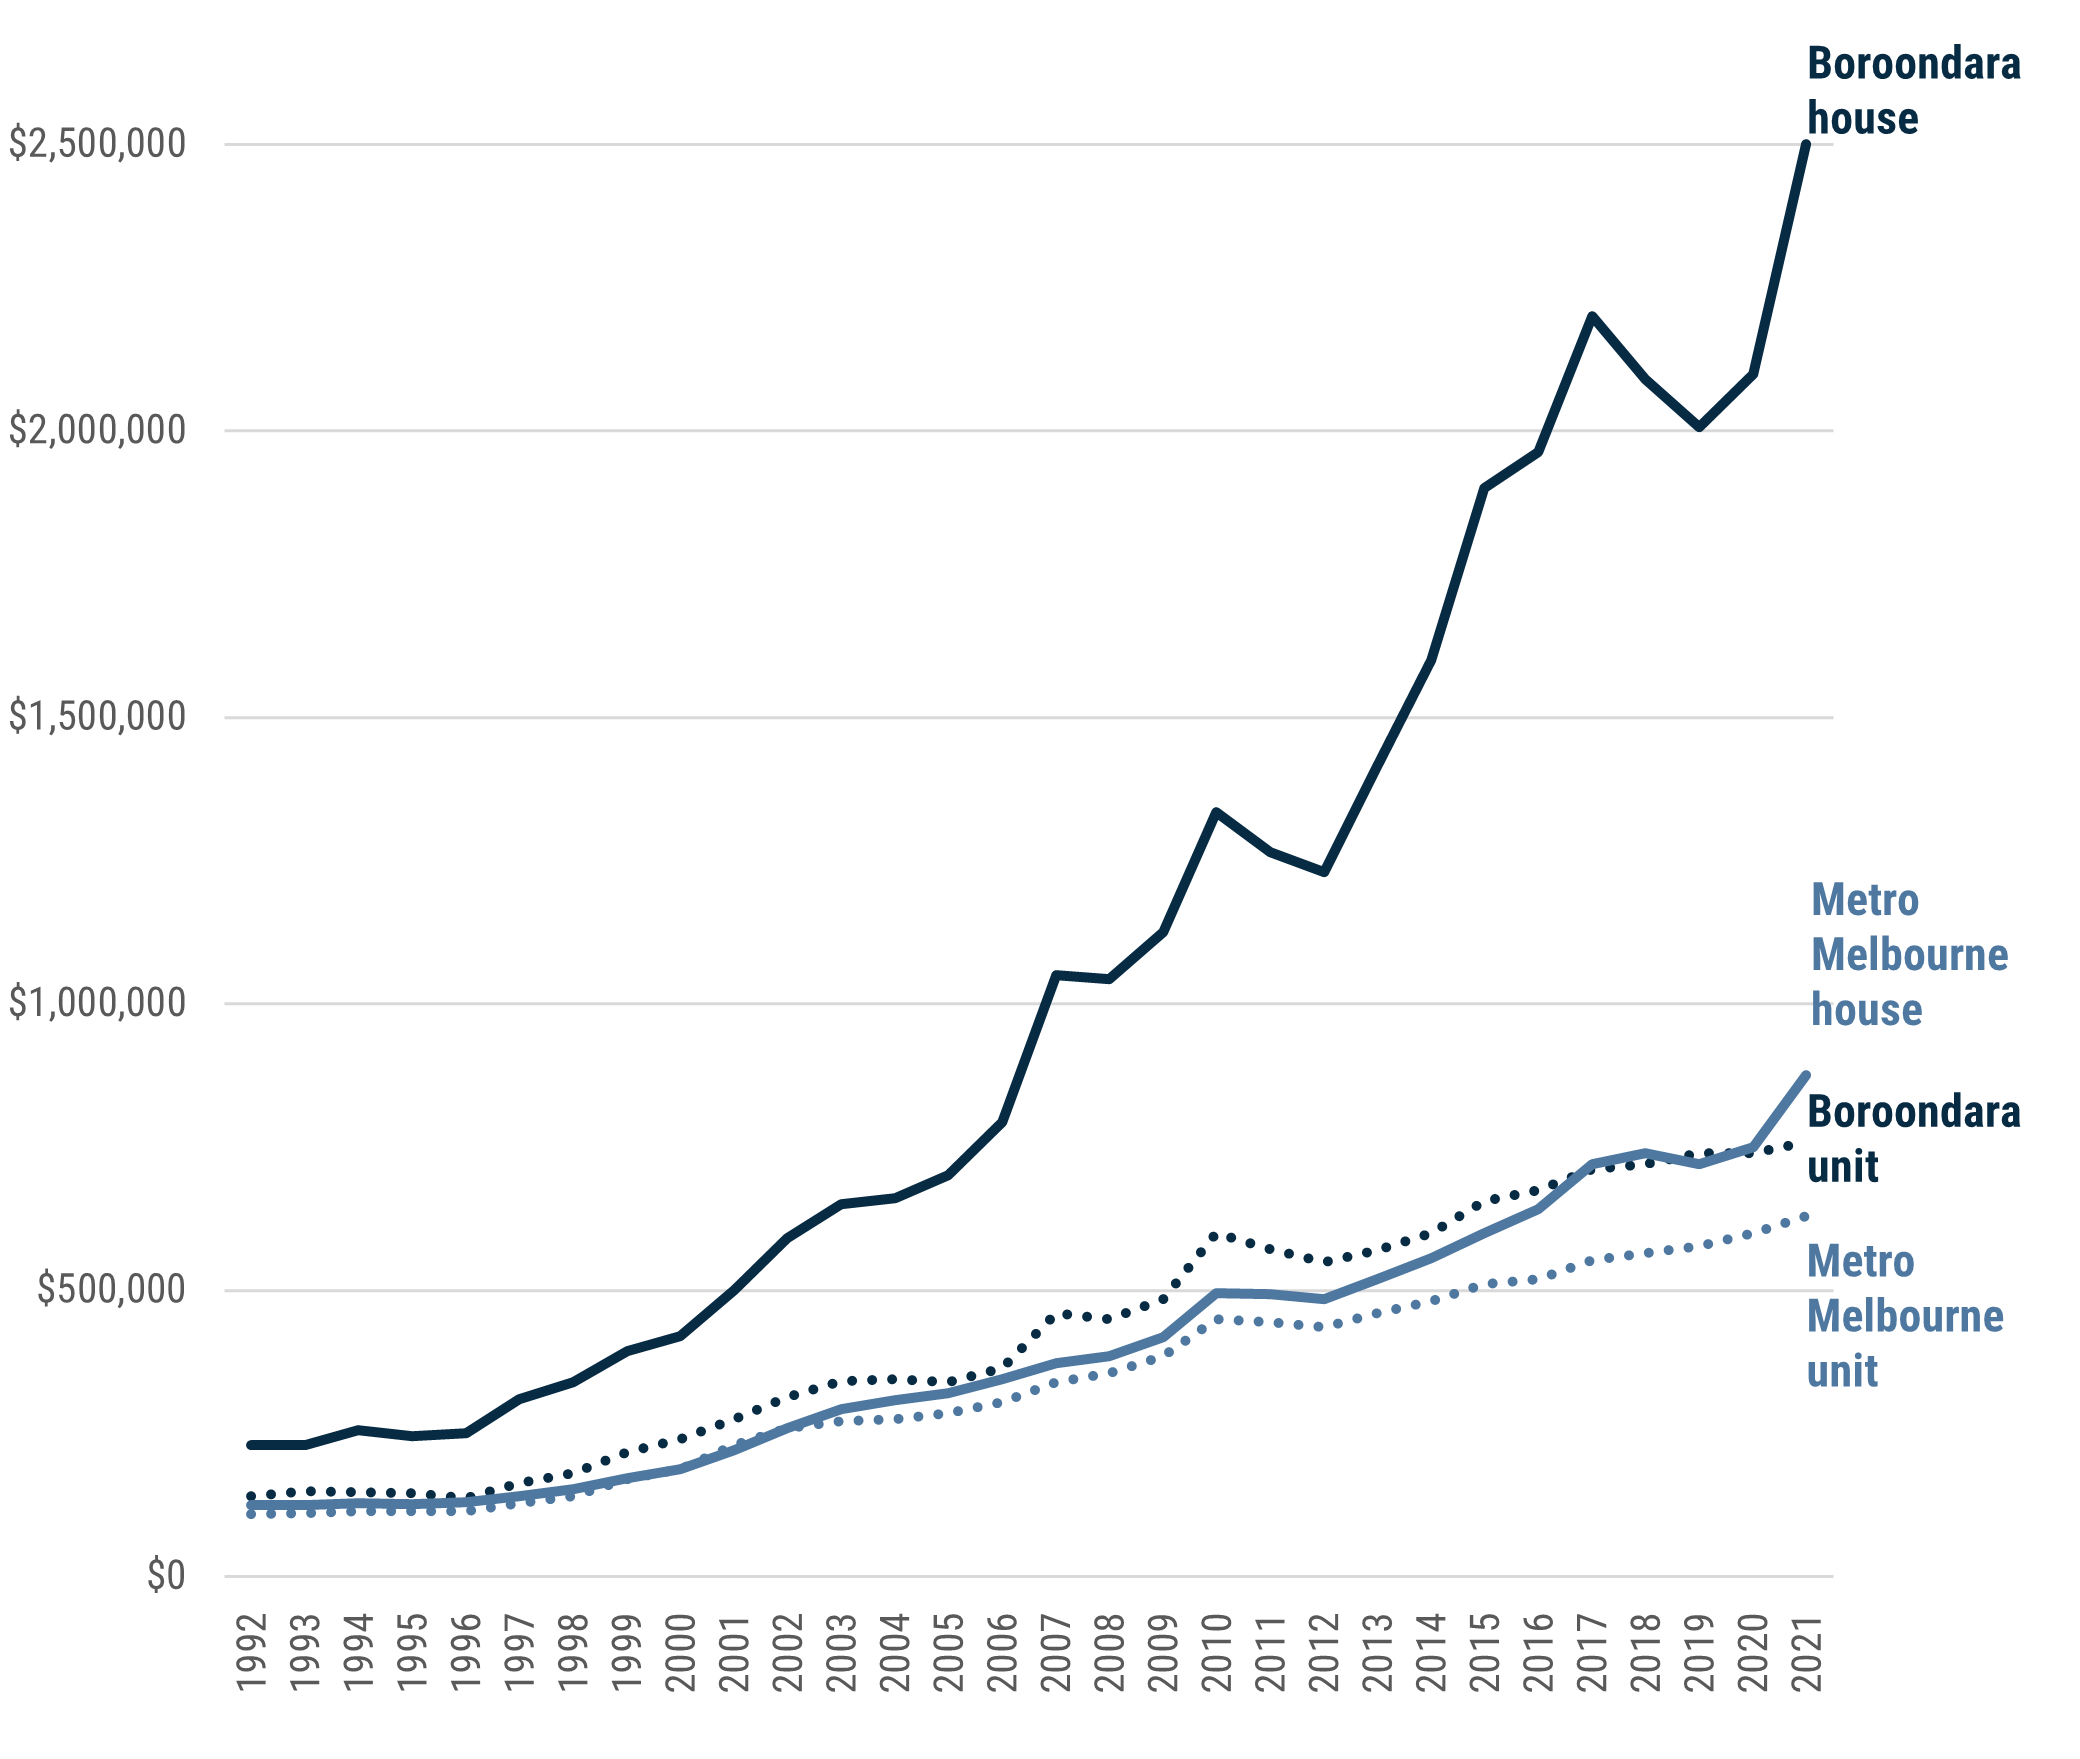 Figure 6 is a line chart showing that between 1992 and 2021, Boroondara's median house price rose from $23,0000 to $2.5 million. Boroondara's median unit price rose from $140,000 to $758,000. Metropolitan Melbourne median house prices rose from $125,000 to $875,000 and median unit prices rose from $110,000 to $630,000.